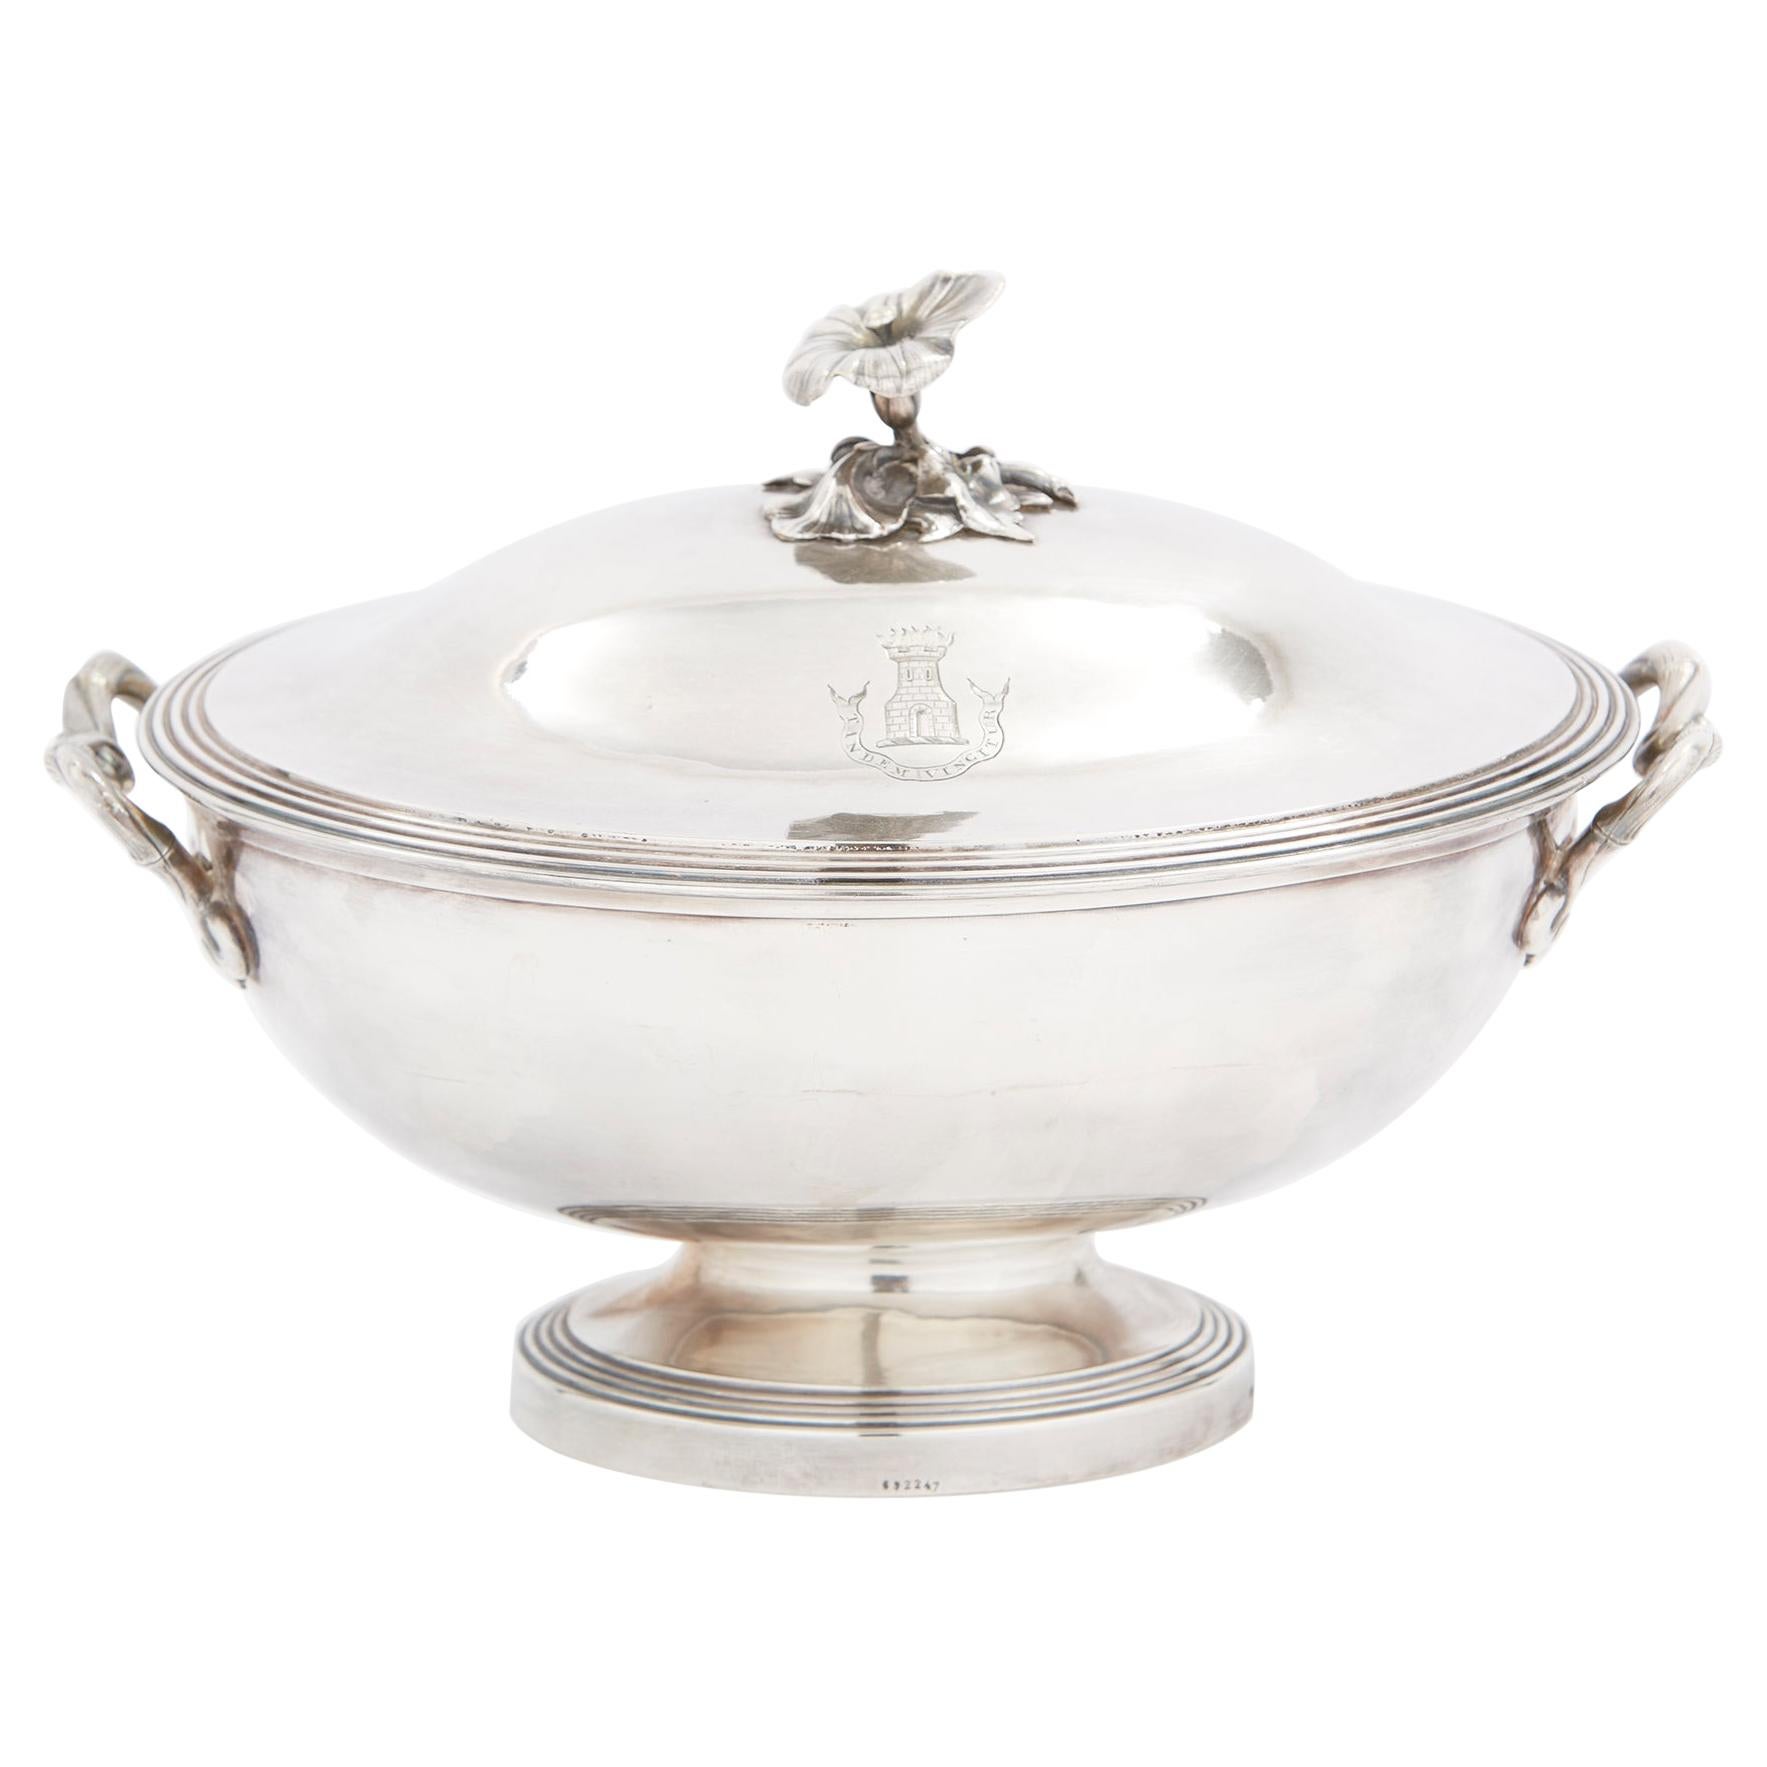 Elegant / Refined French Silver Plate Covered Tureen